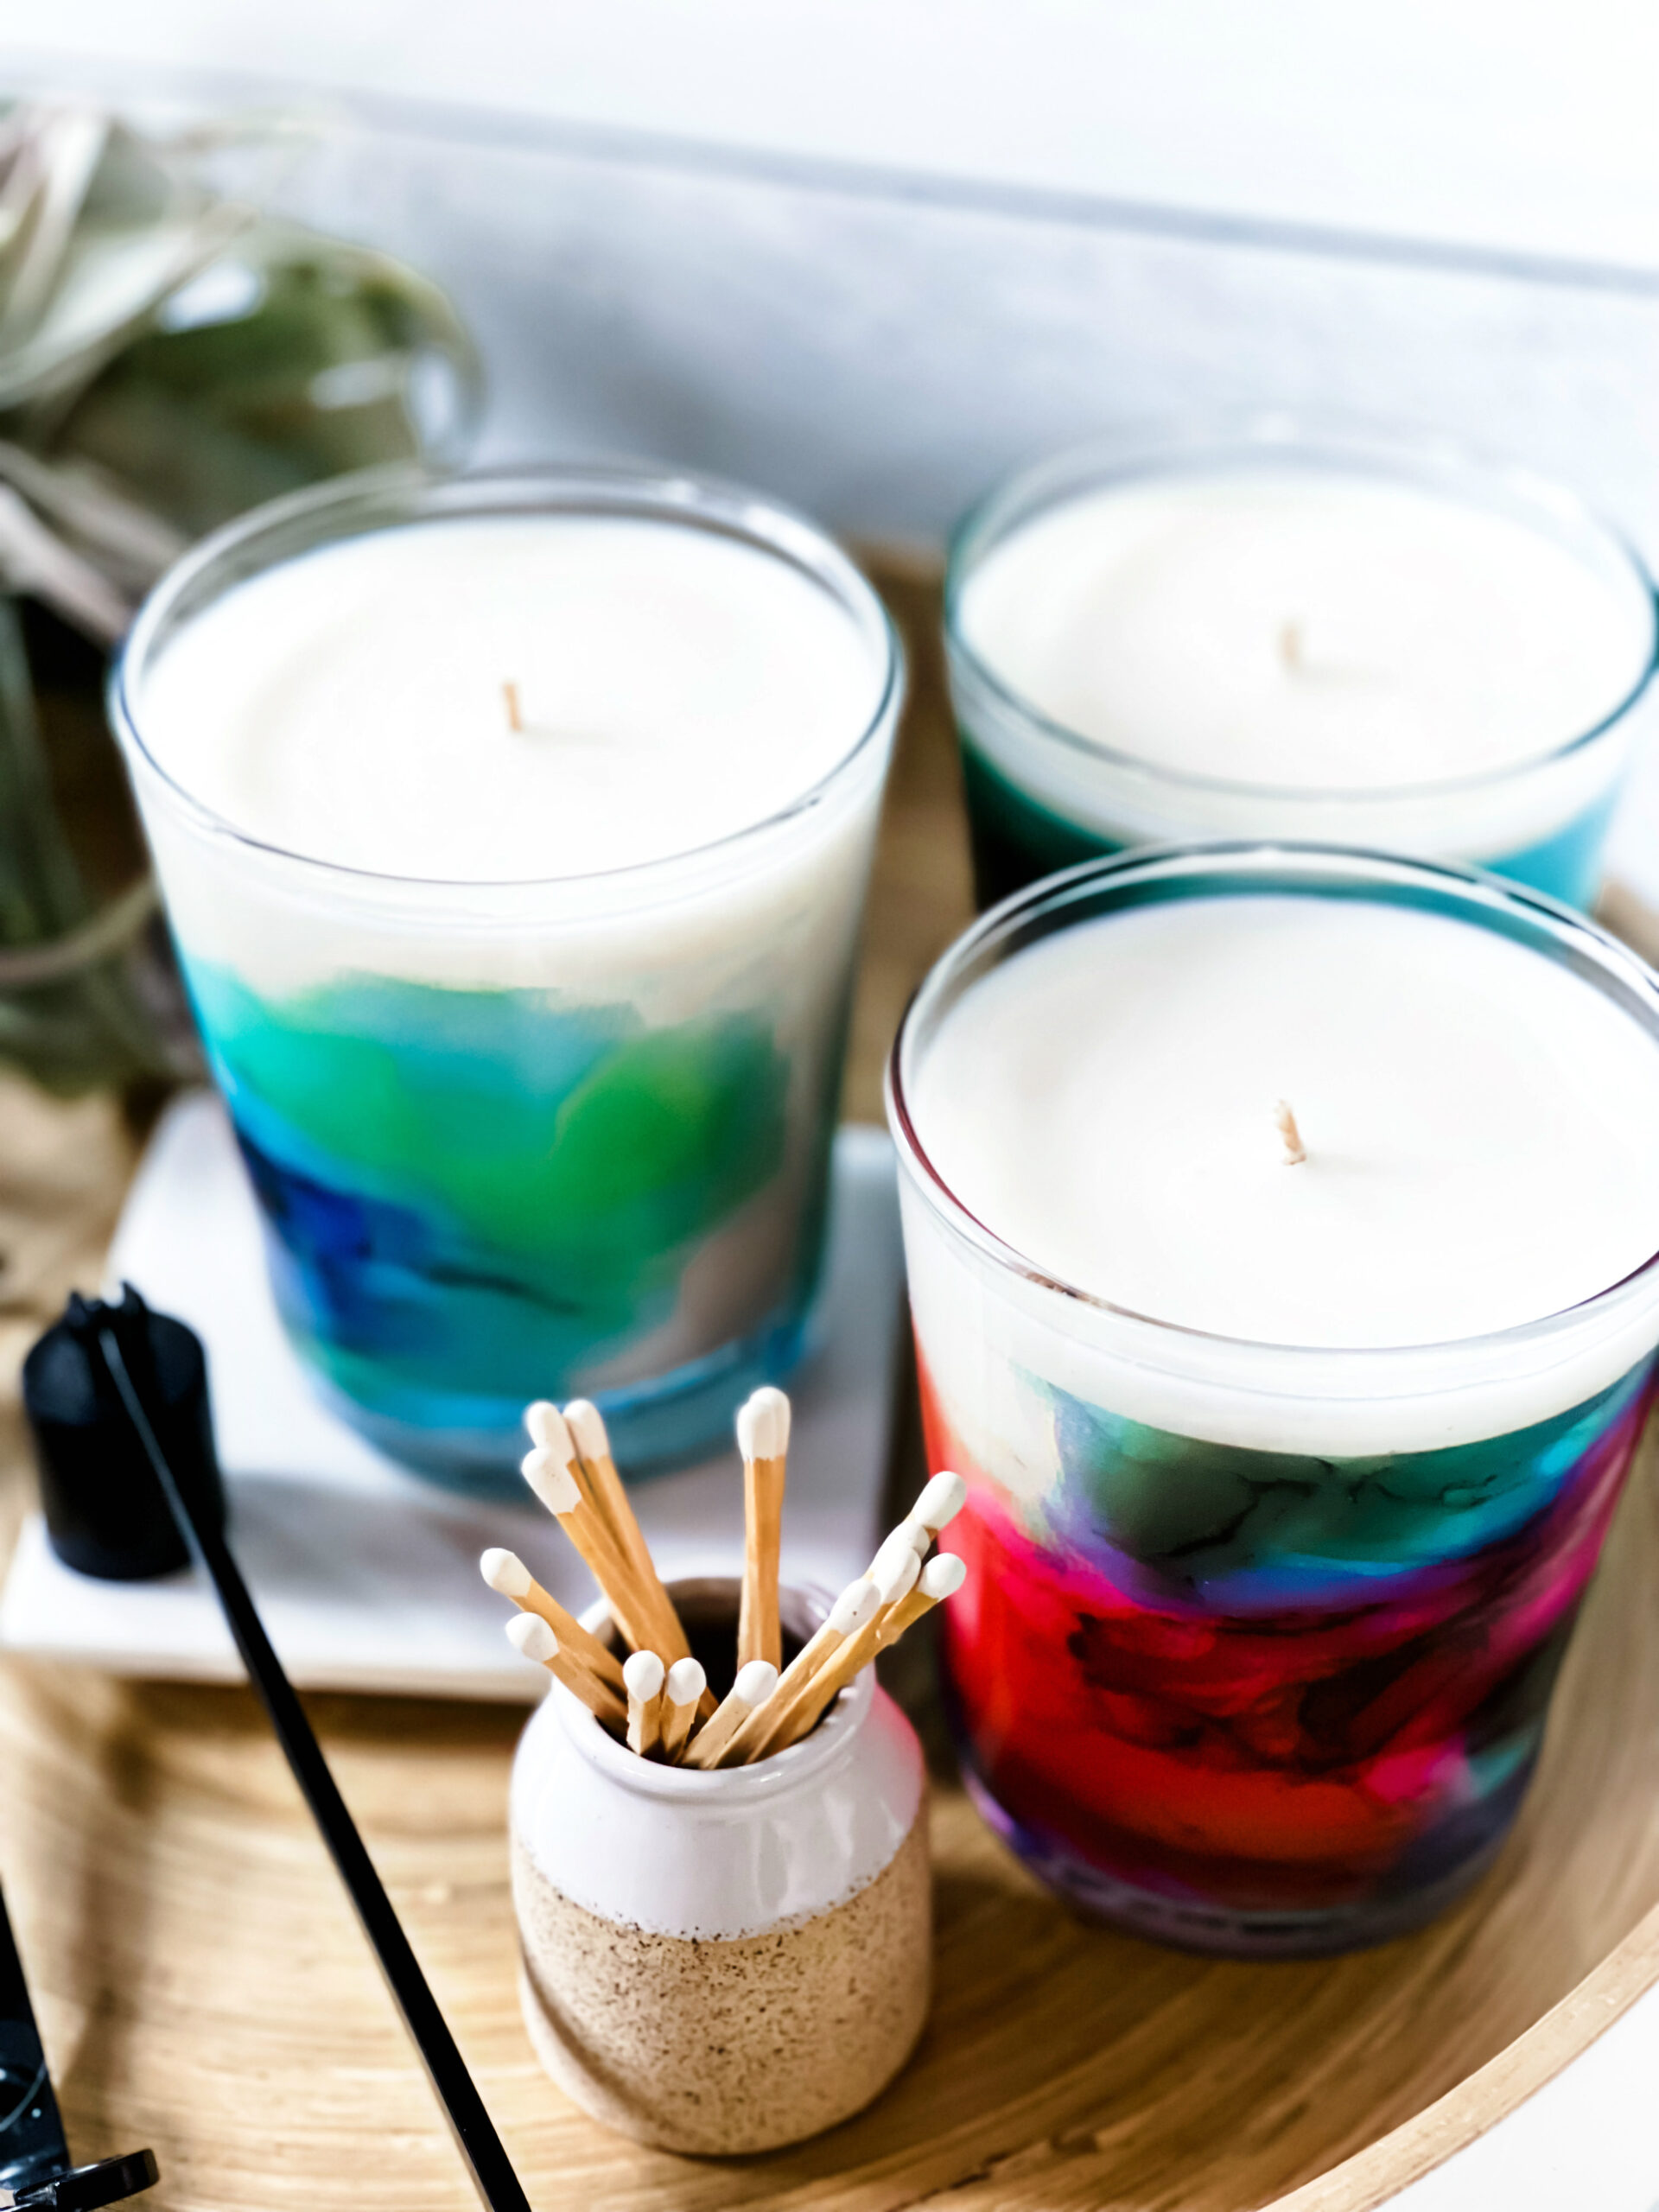 Artistscent Fragrance Candles, Candle Styling In Home, Candle Decor, Elizabeth Karlson